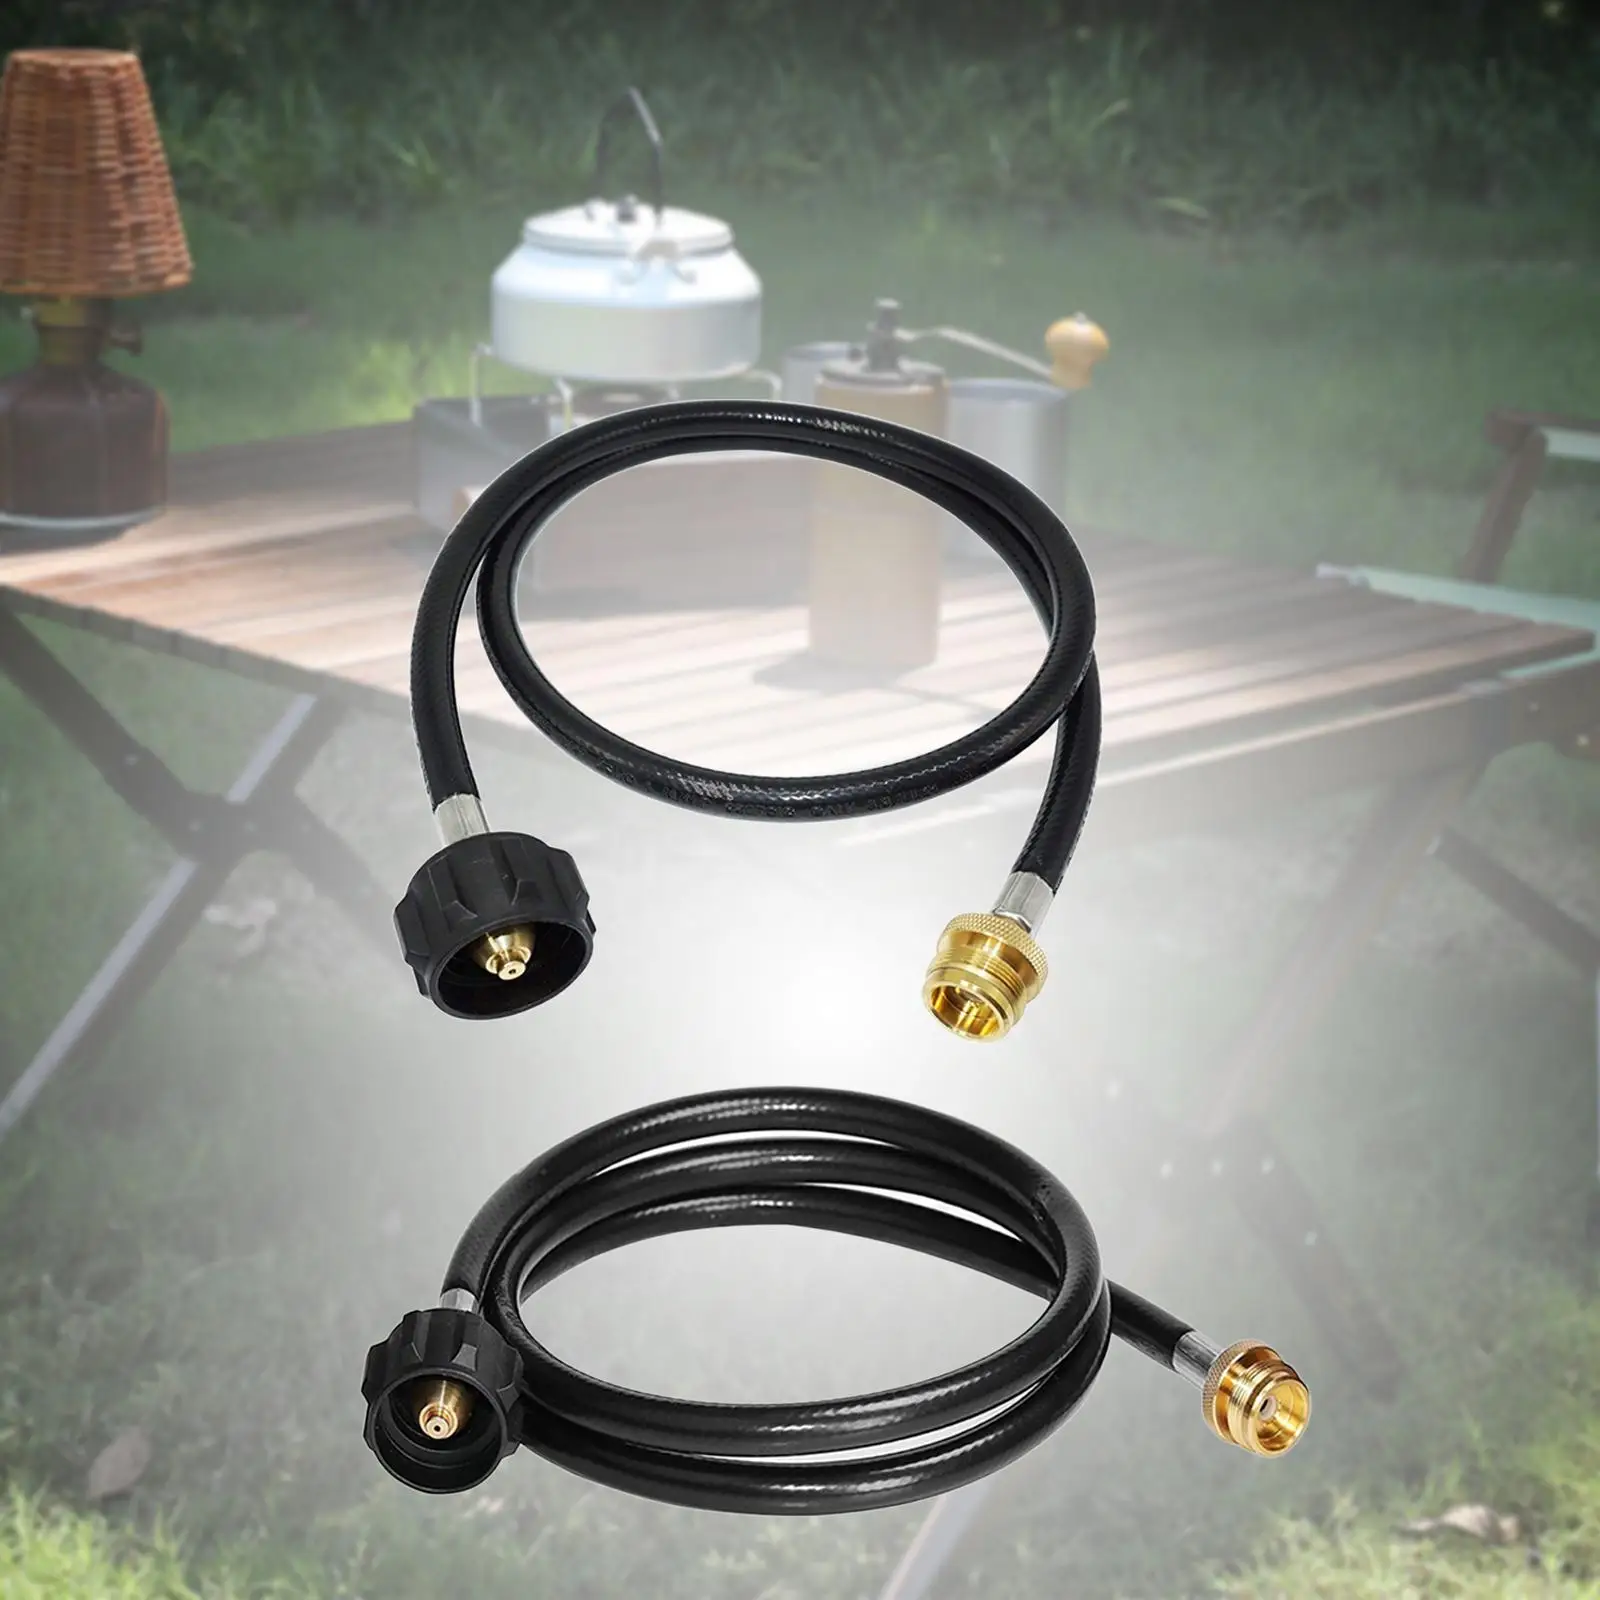 Propane Adapter Hose Replace Propane Tank Hose for Barbecue Outdoor Cooking